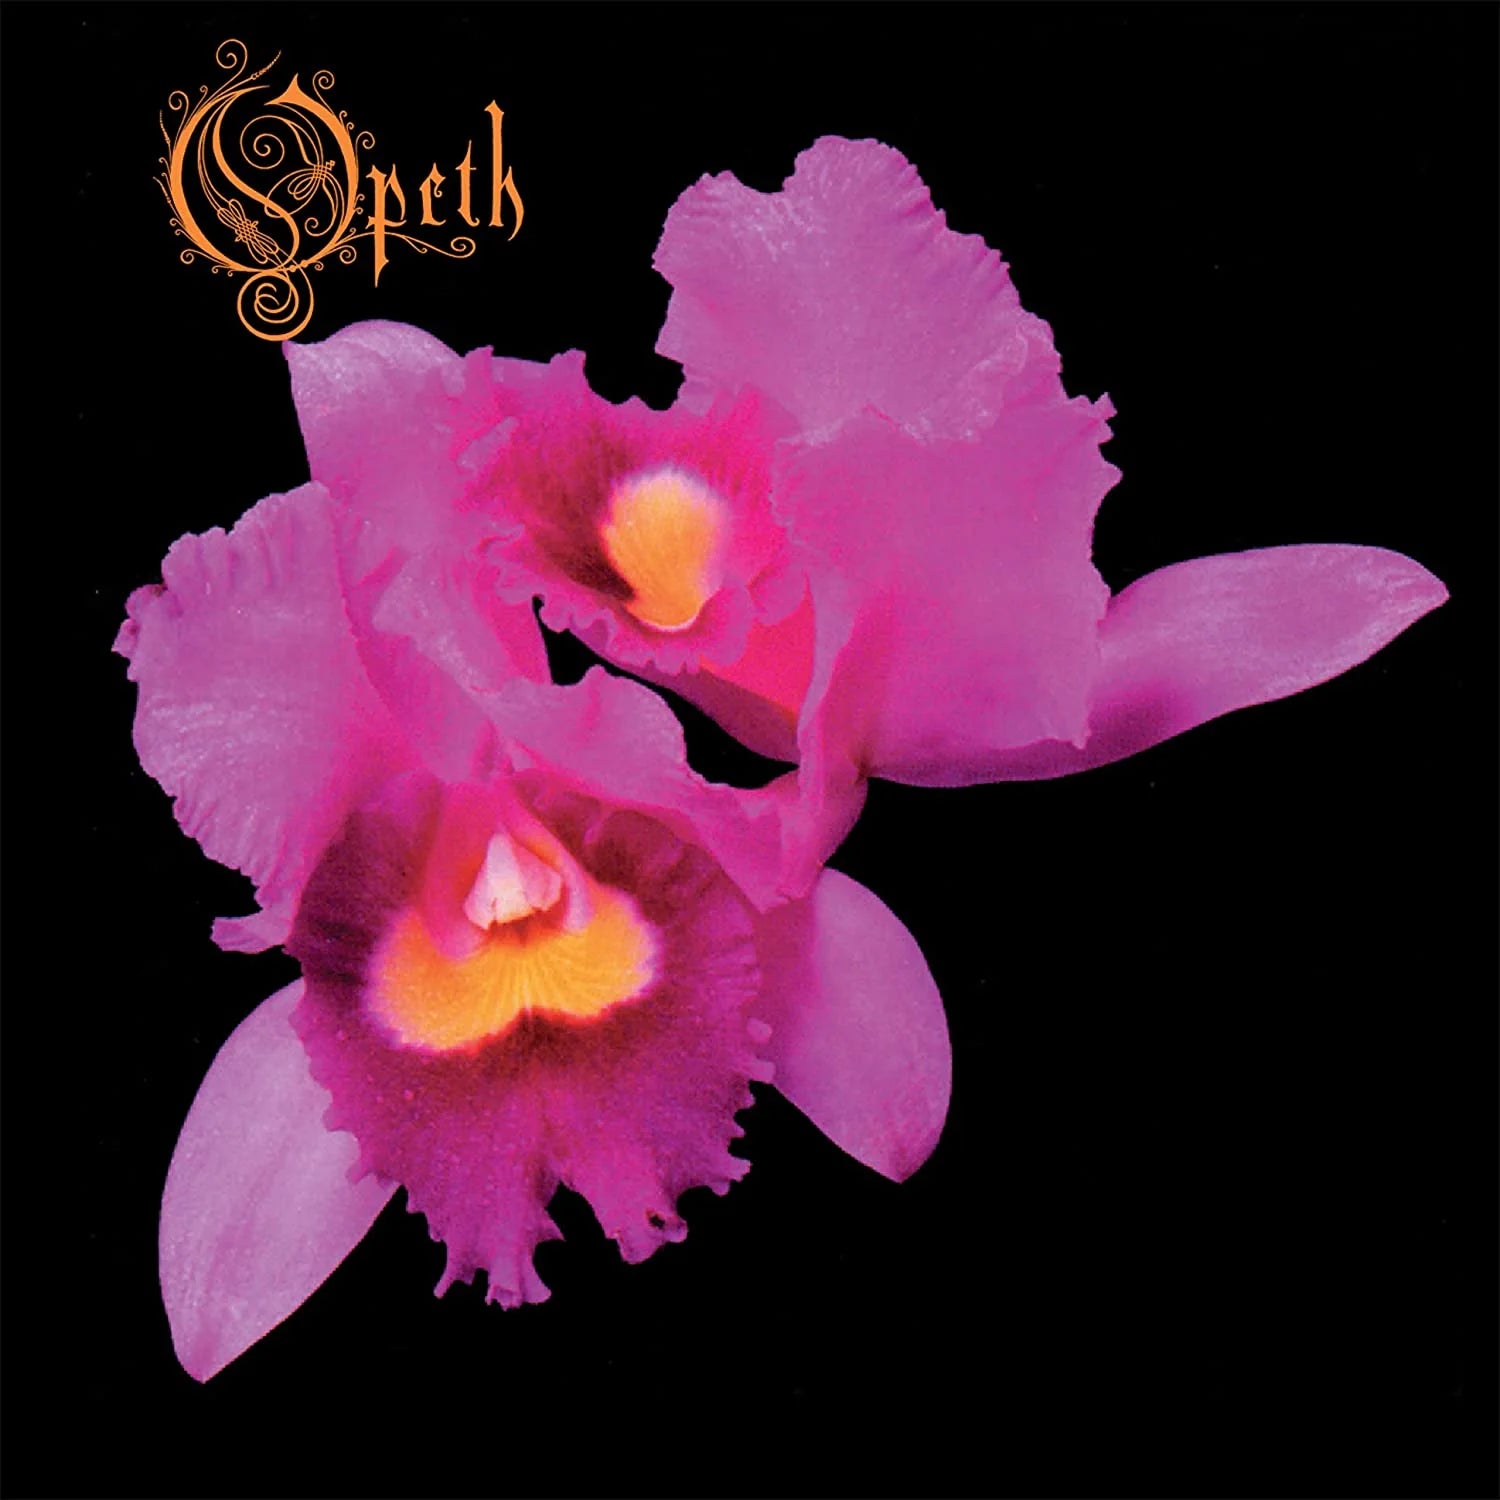 Opeth | Orchid